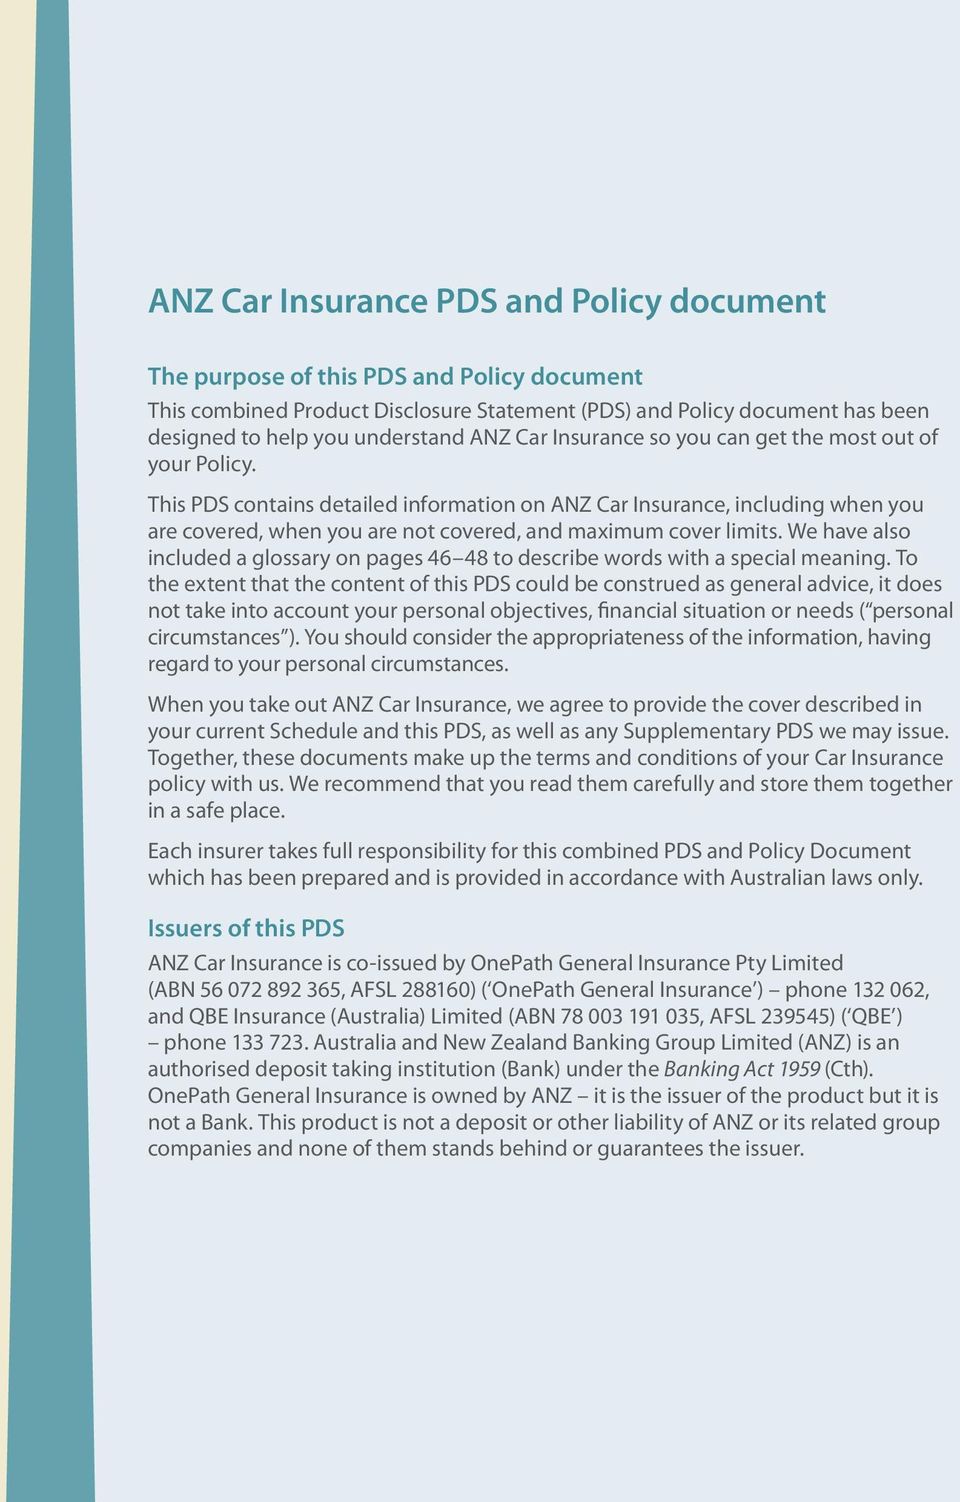 This PDS contains detailed information on ANZ Car Insurance, including when you are covered, when you are not covered, and maximum cover limits.